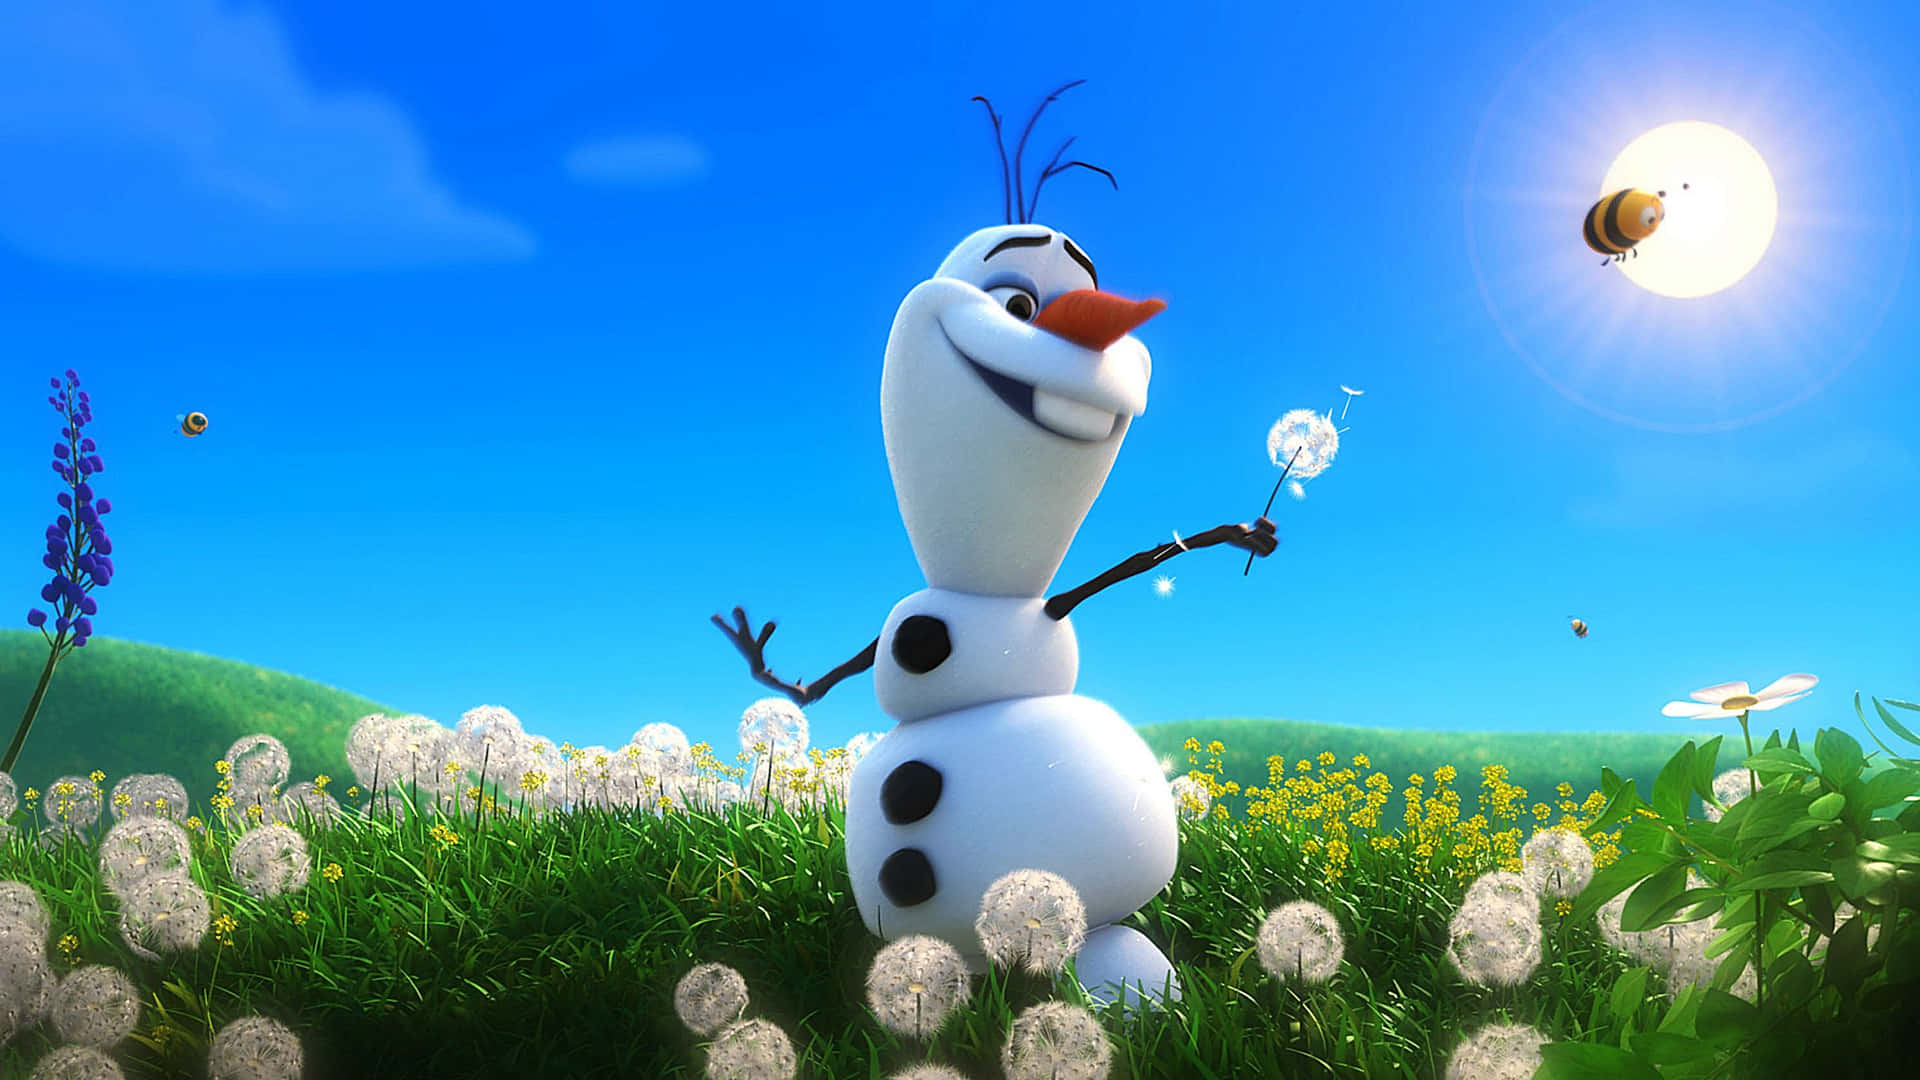 "Catch the sunshine with Olaf!" Wallpaper